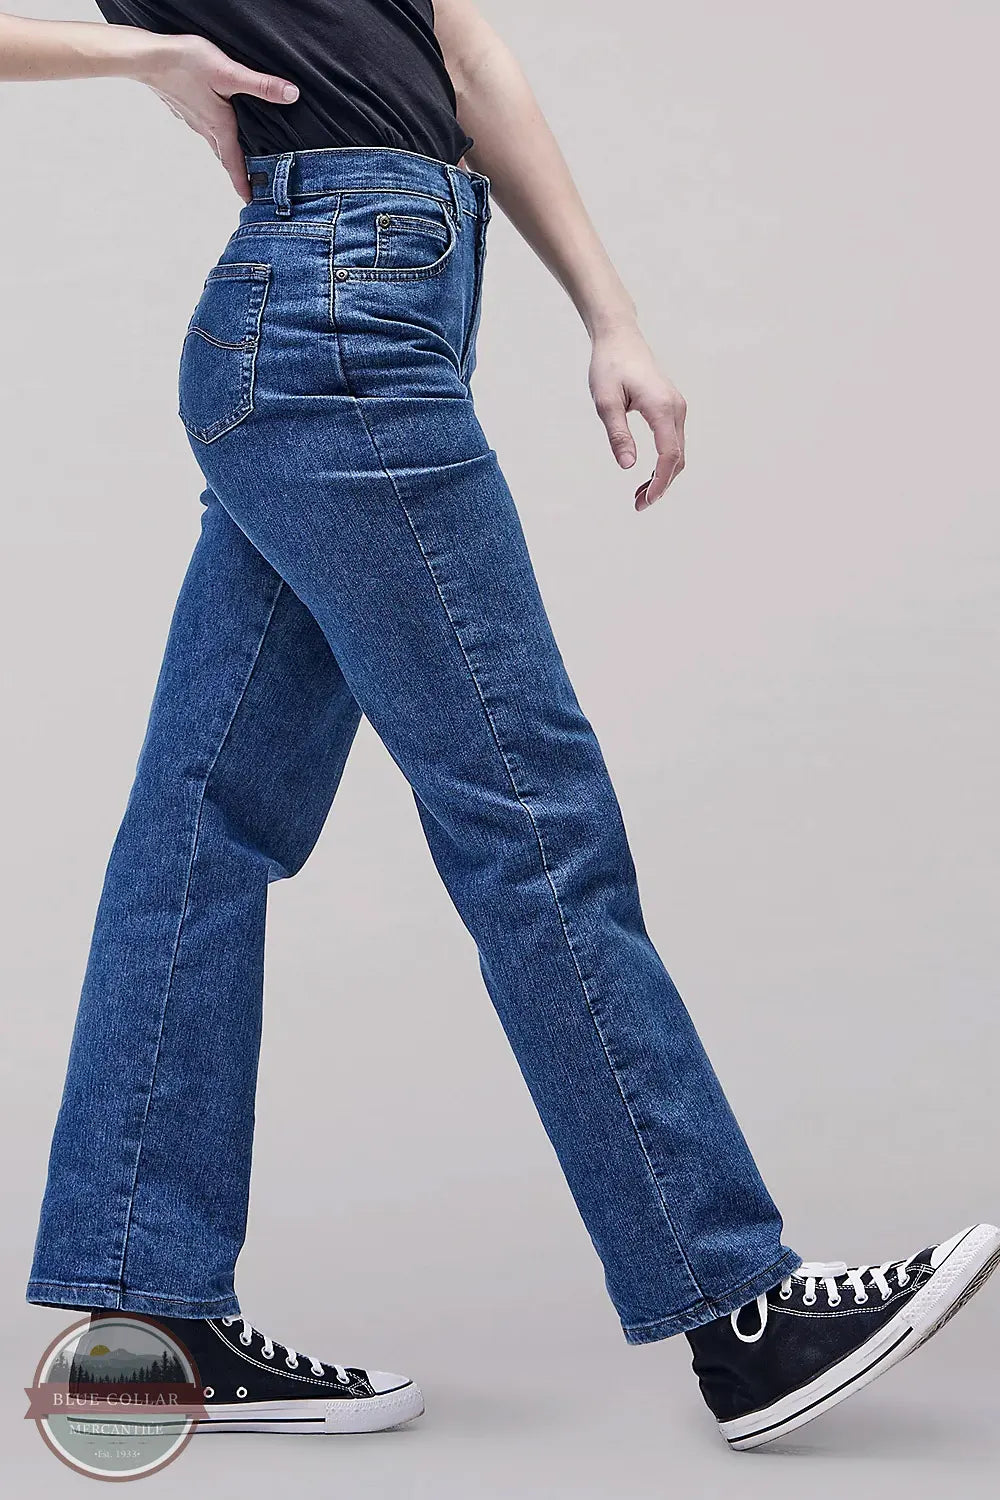 Lee 3051866 Premium Stone Relaxed Fit Jeans side view